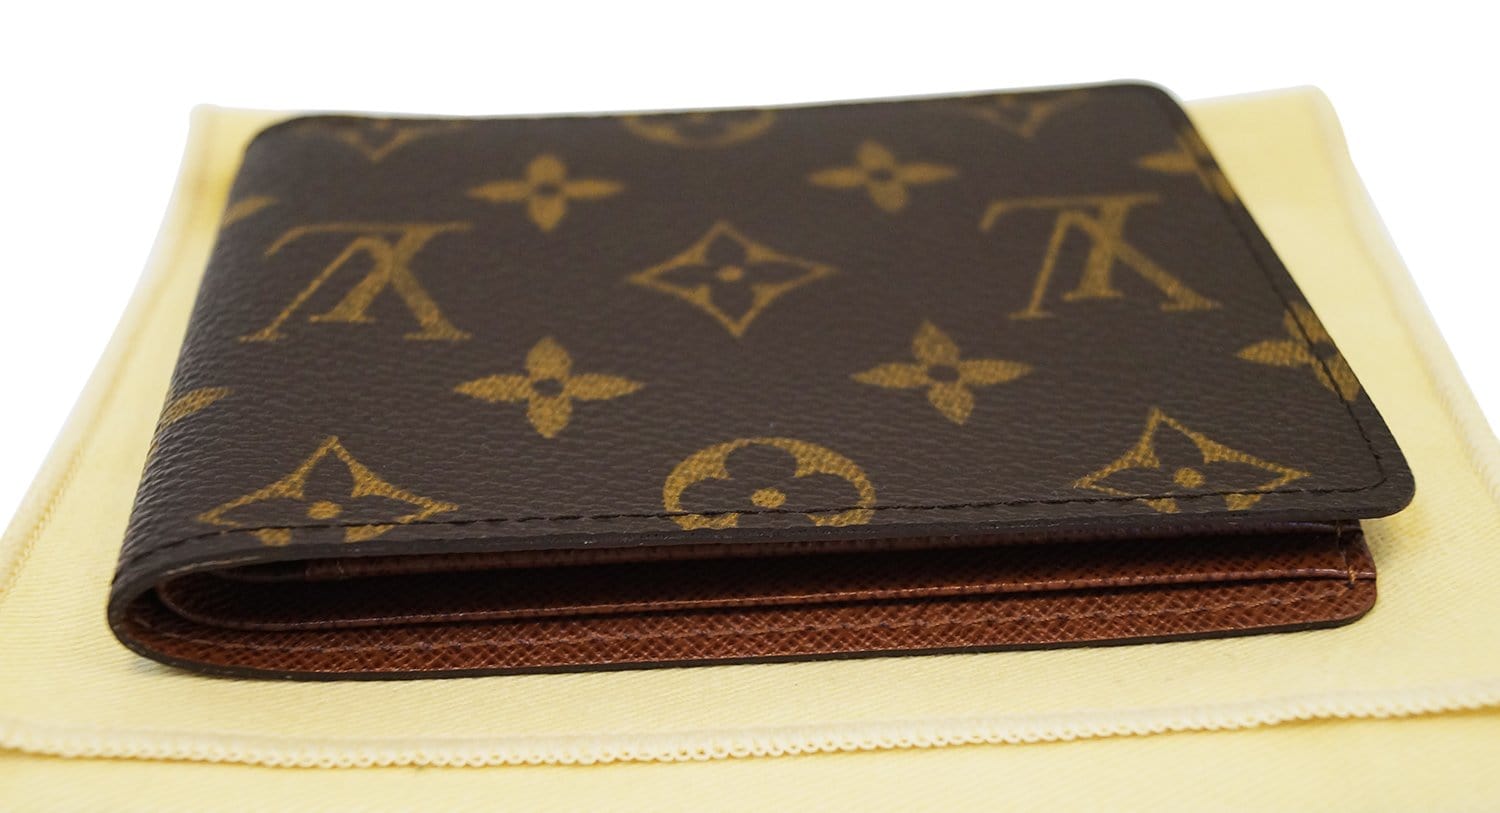 (used) Louis Vuitton Mens Bifold Wallet Monogram for Sale in